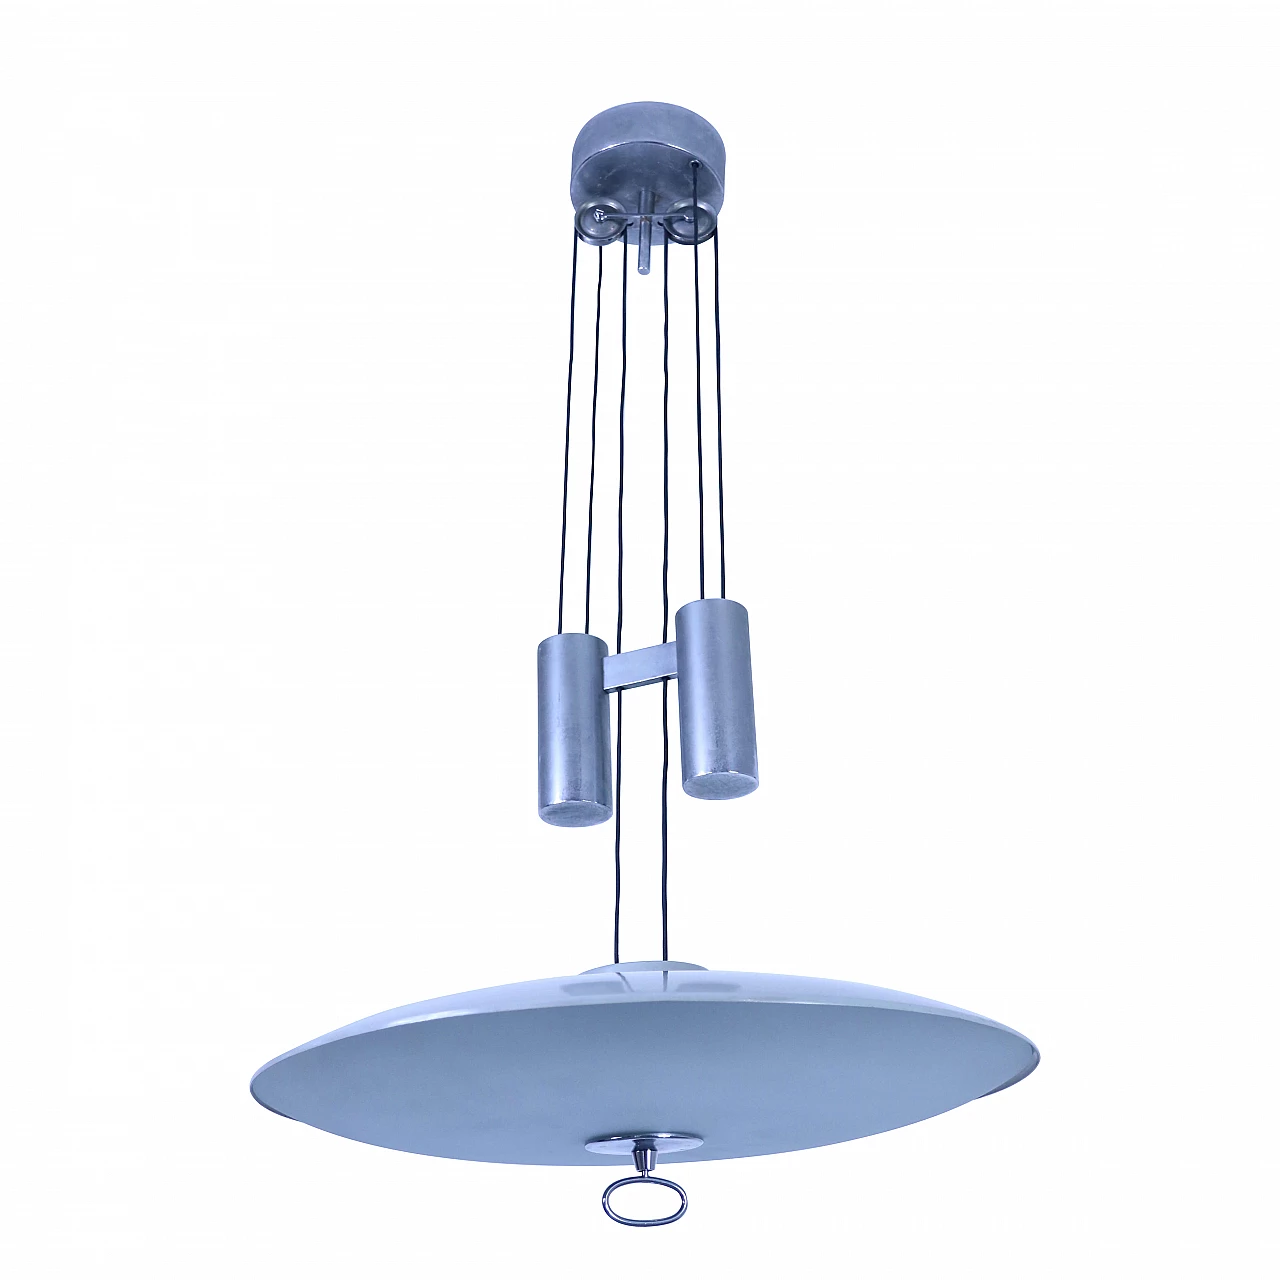 Ceiling lamp with counterweight by Max Ingrand for Fontana Arte 1178792